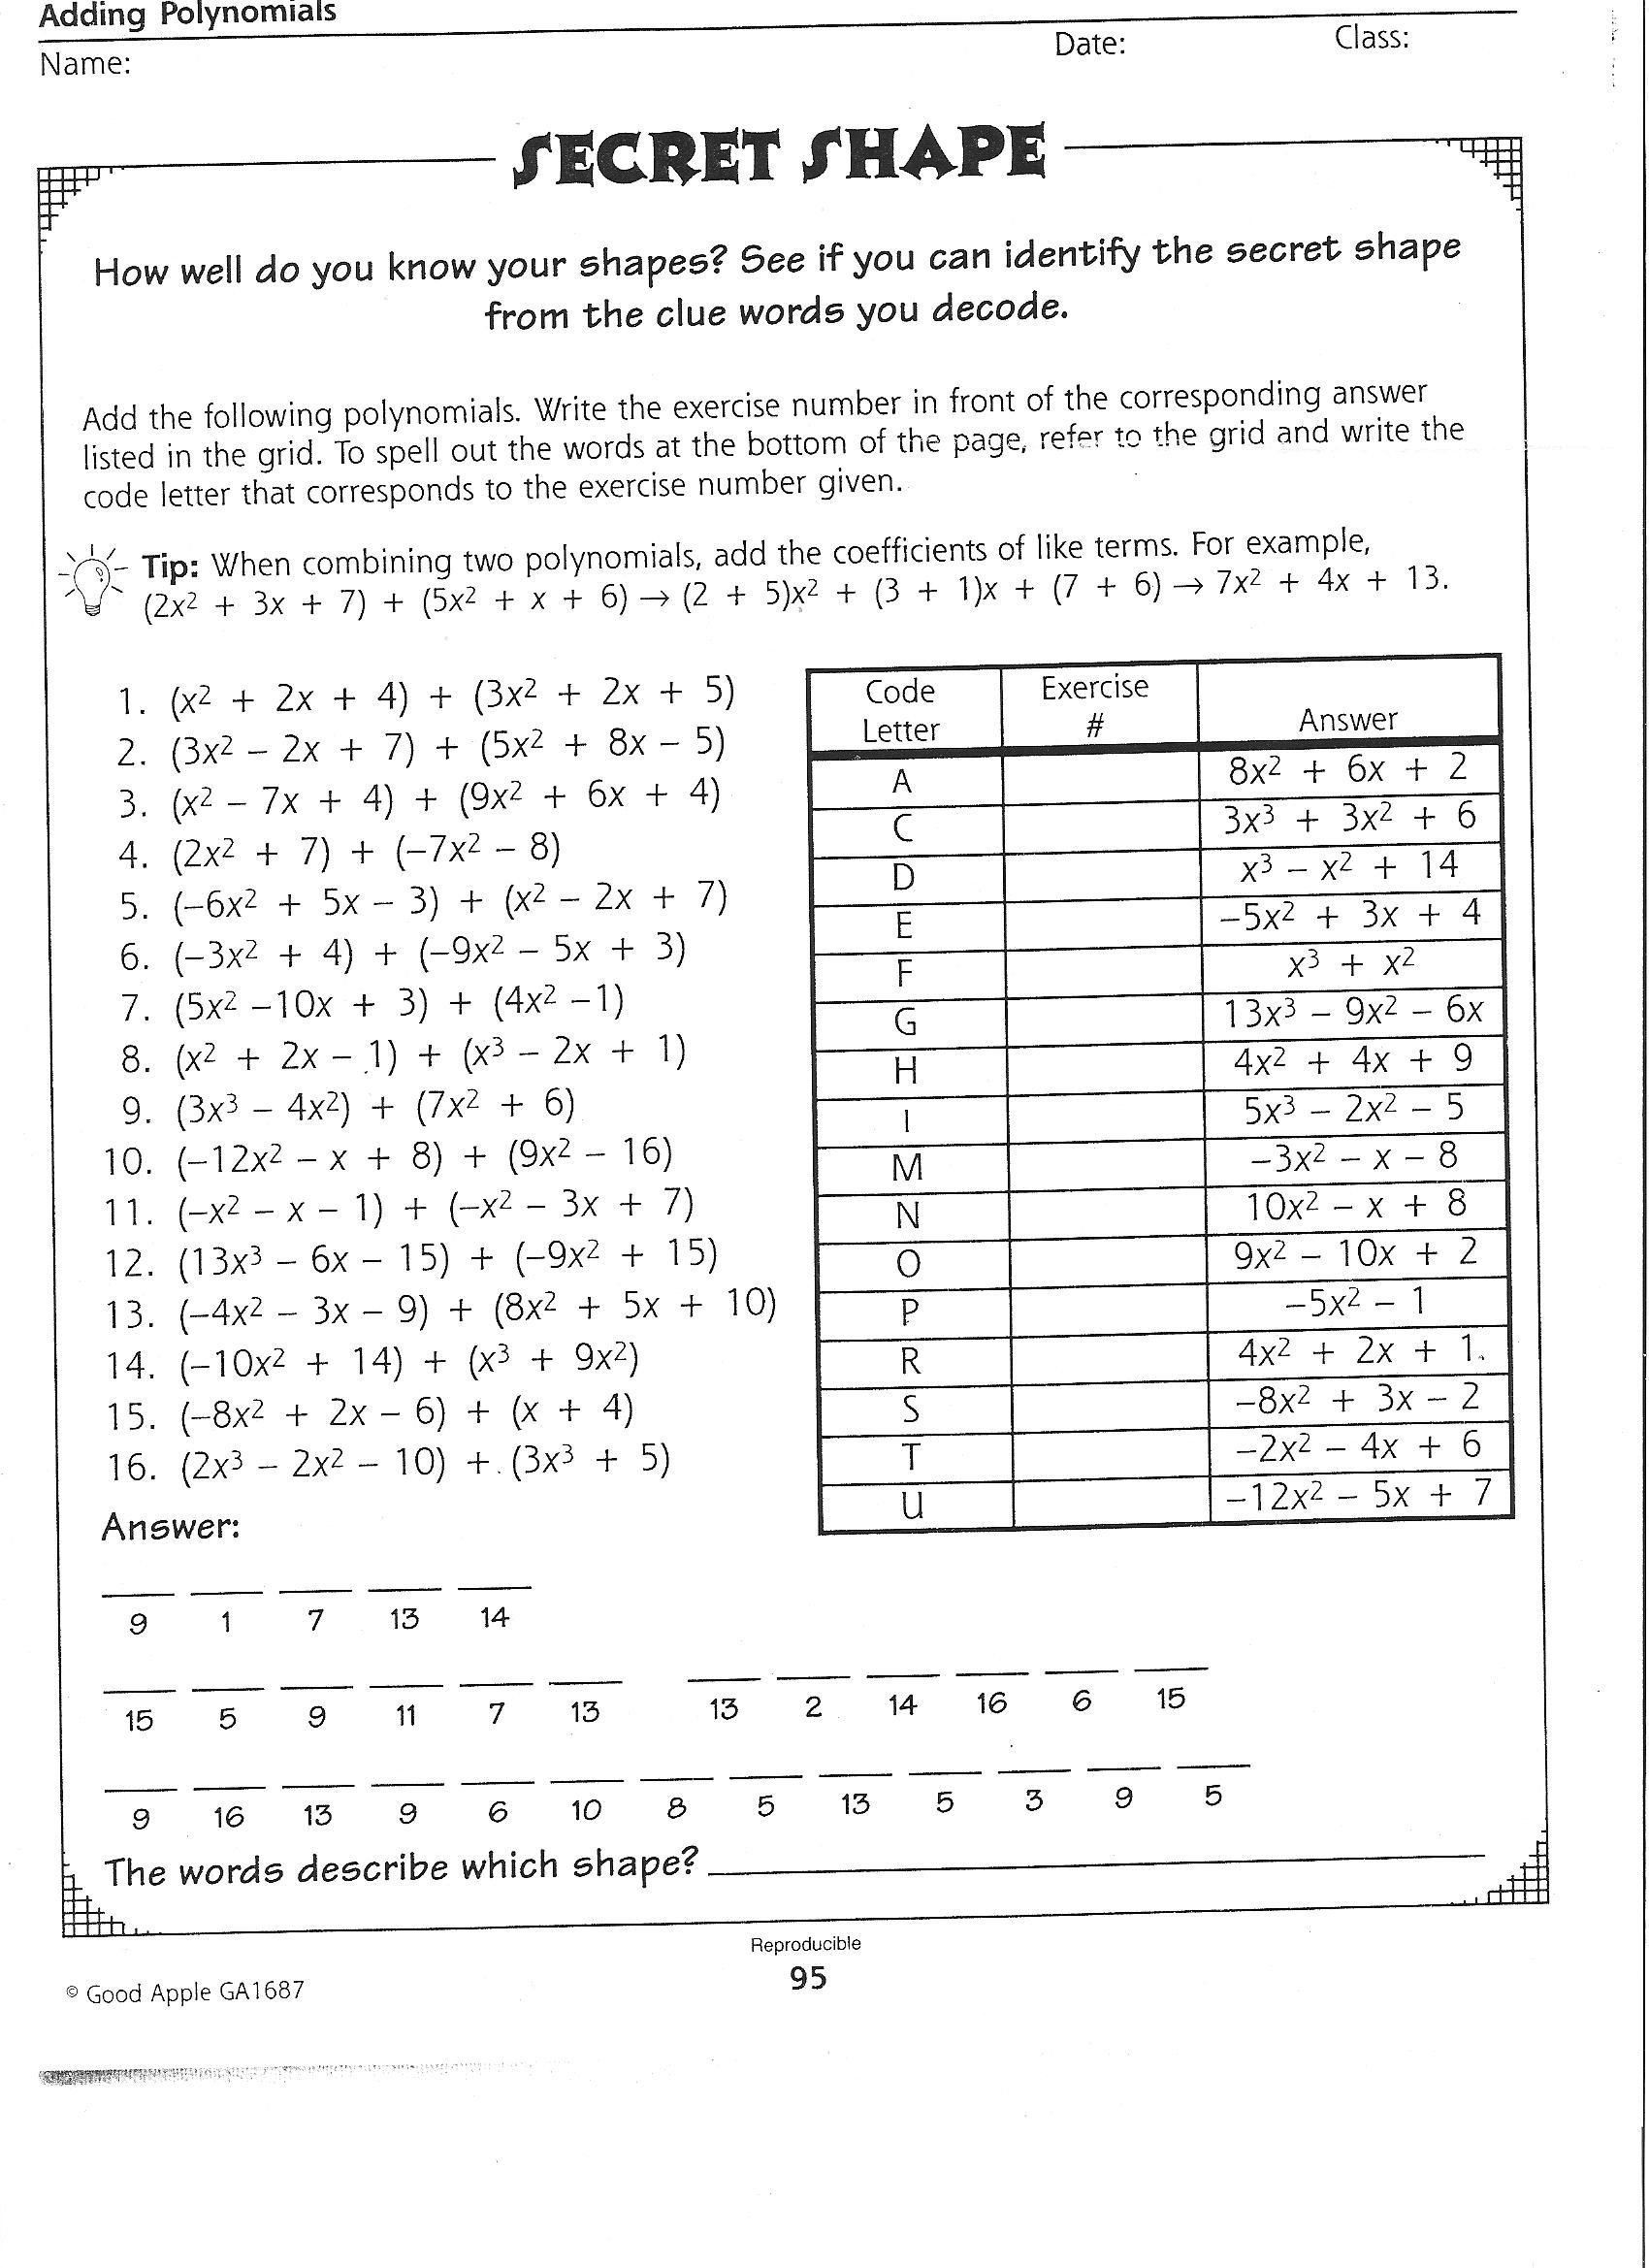 Multiplying Polynomials Worksheet Answers Pin On Printable Education Worksheet Templates